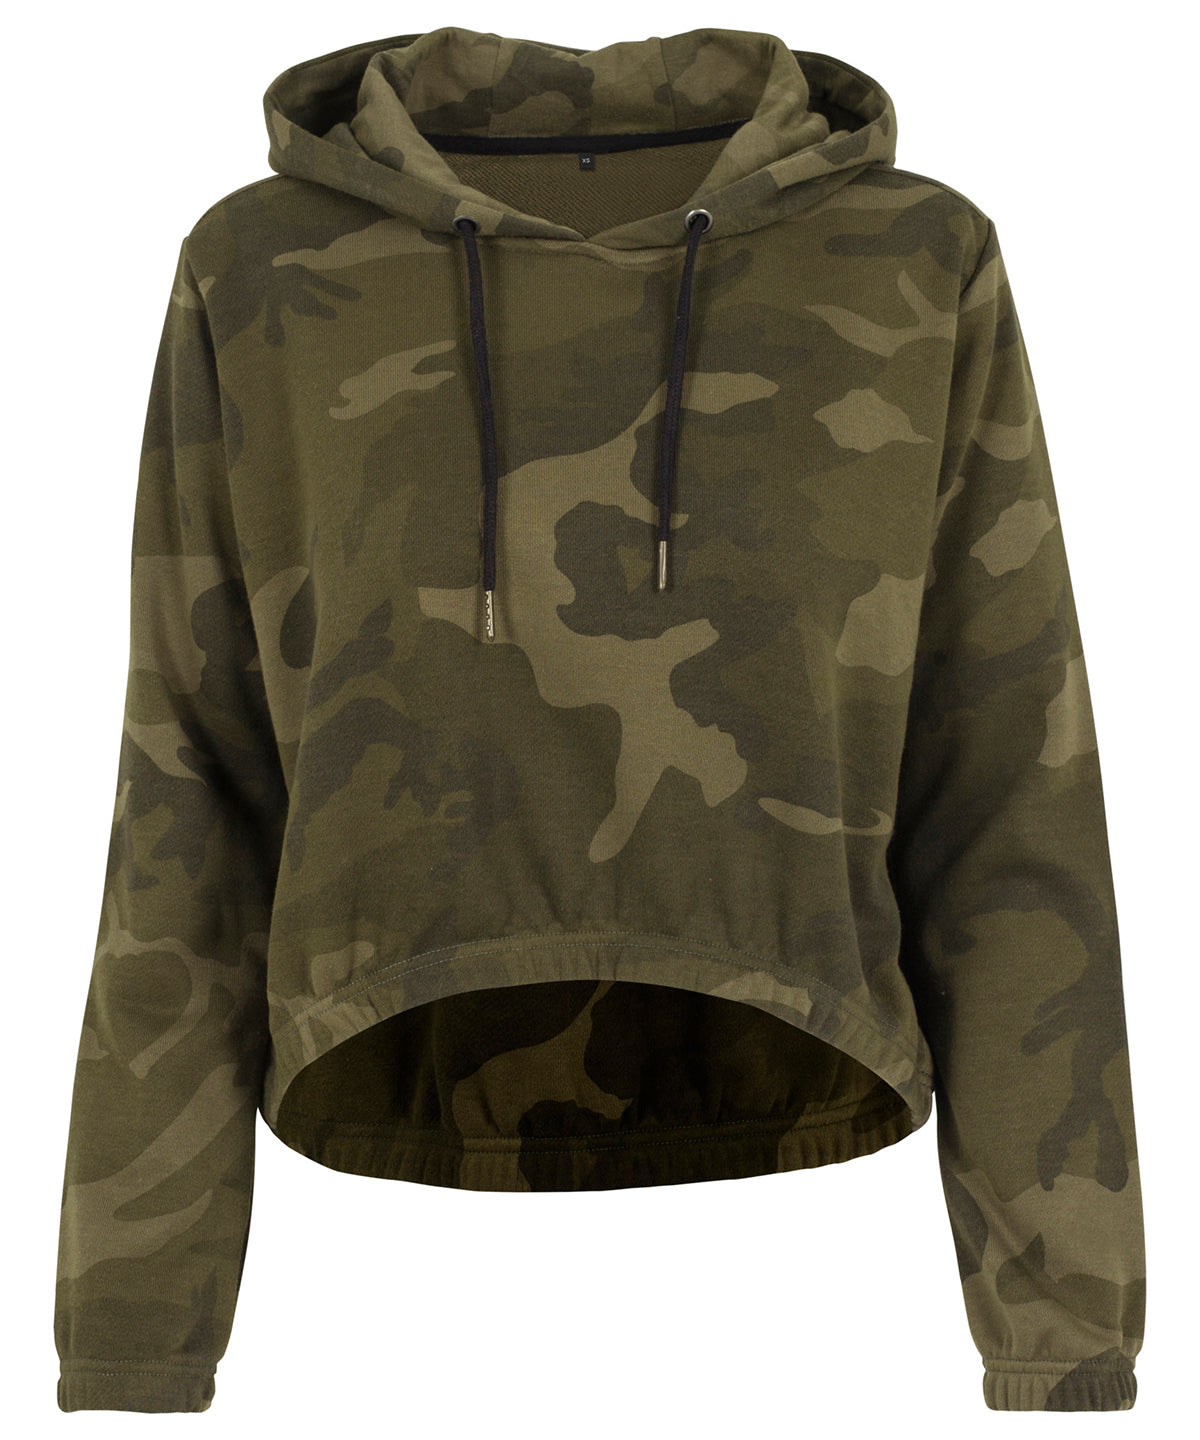 Personalised Hoodies - Camouflage Build Your Brand Women's camo cropped hoodie